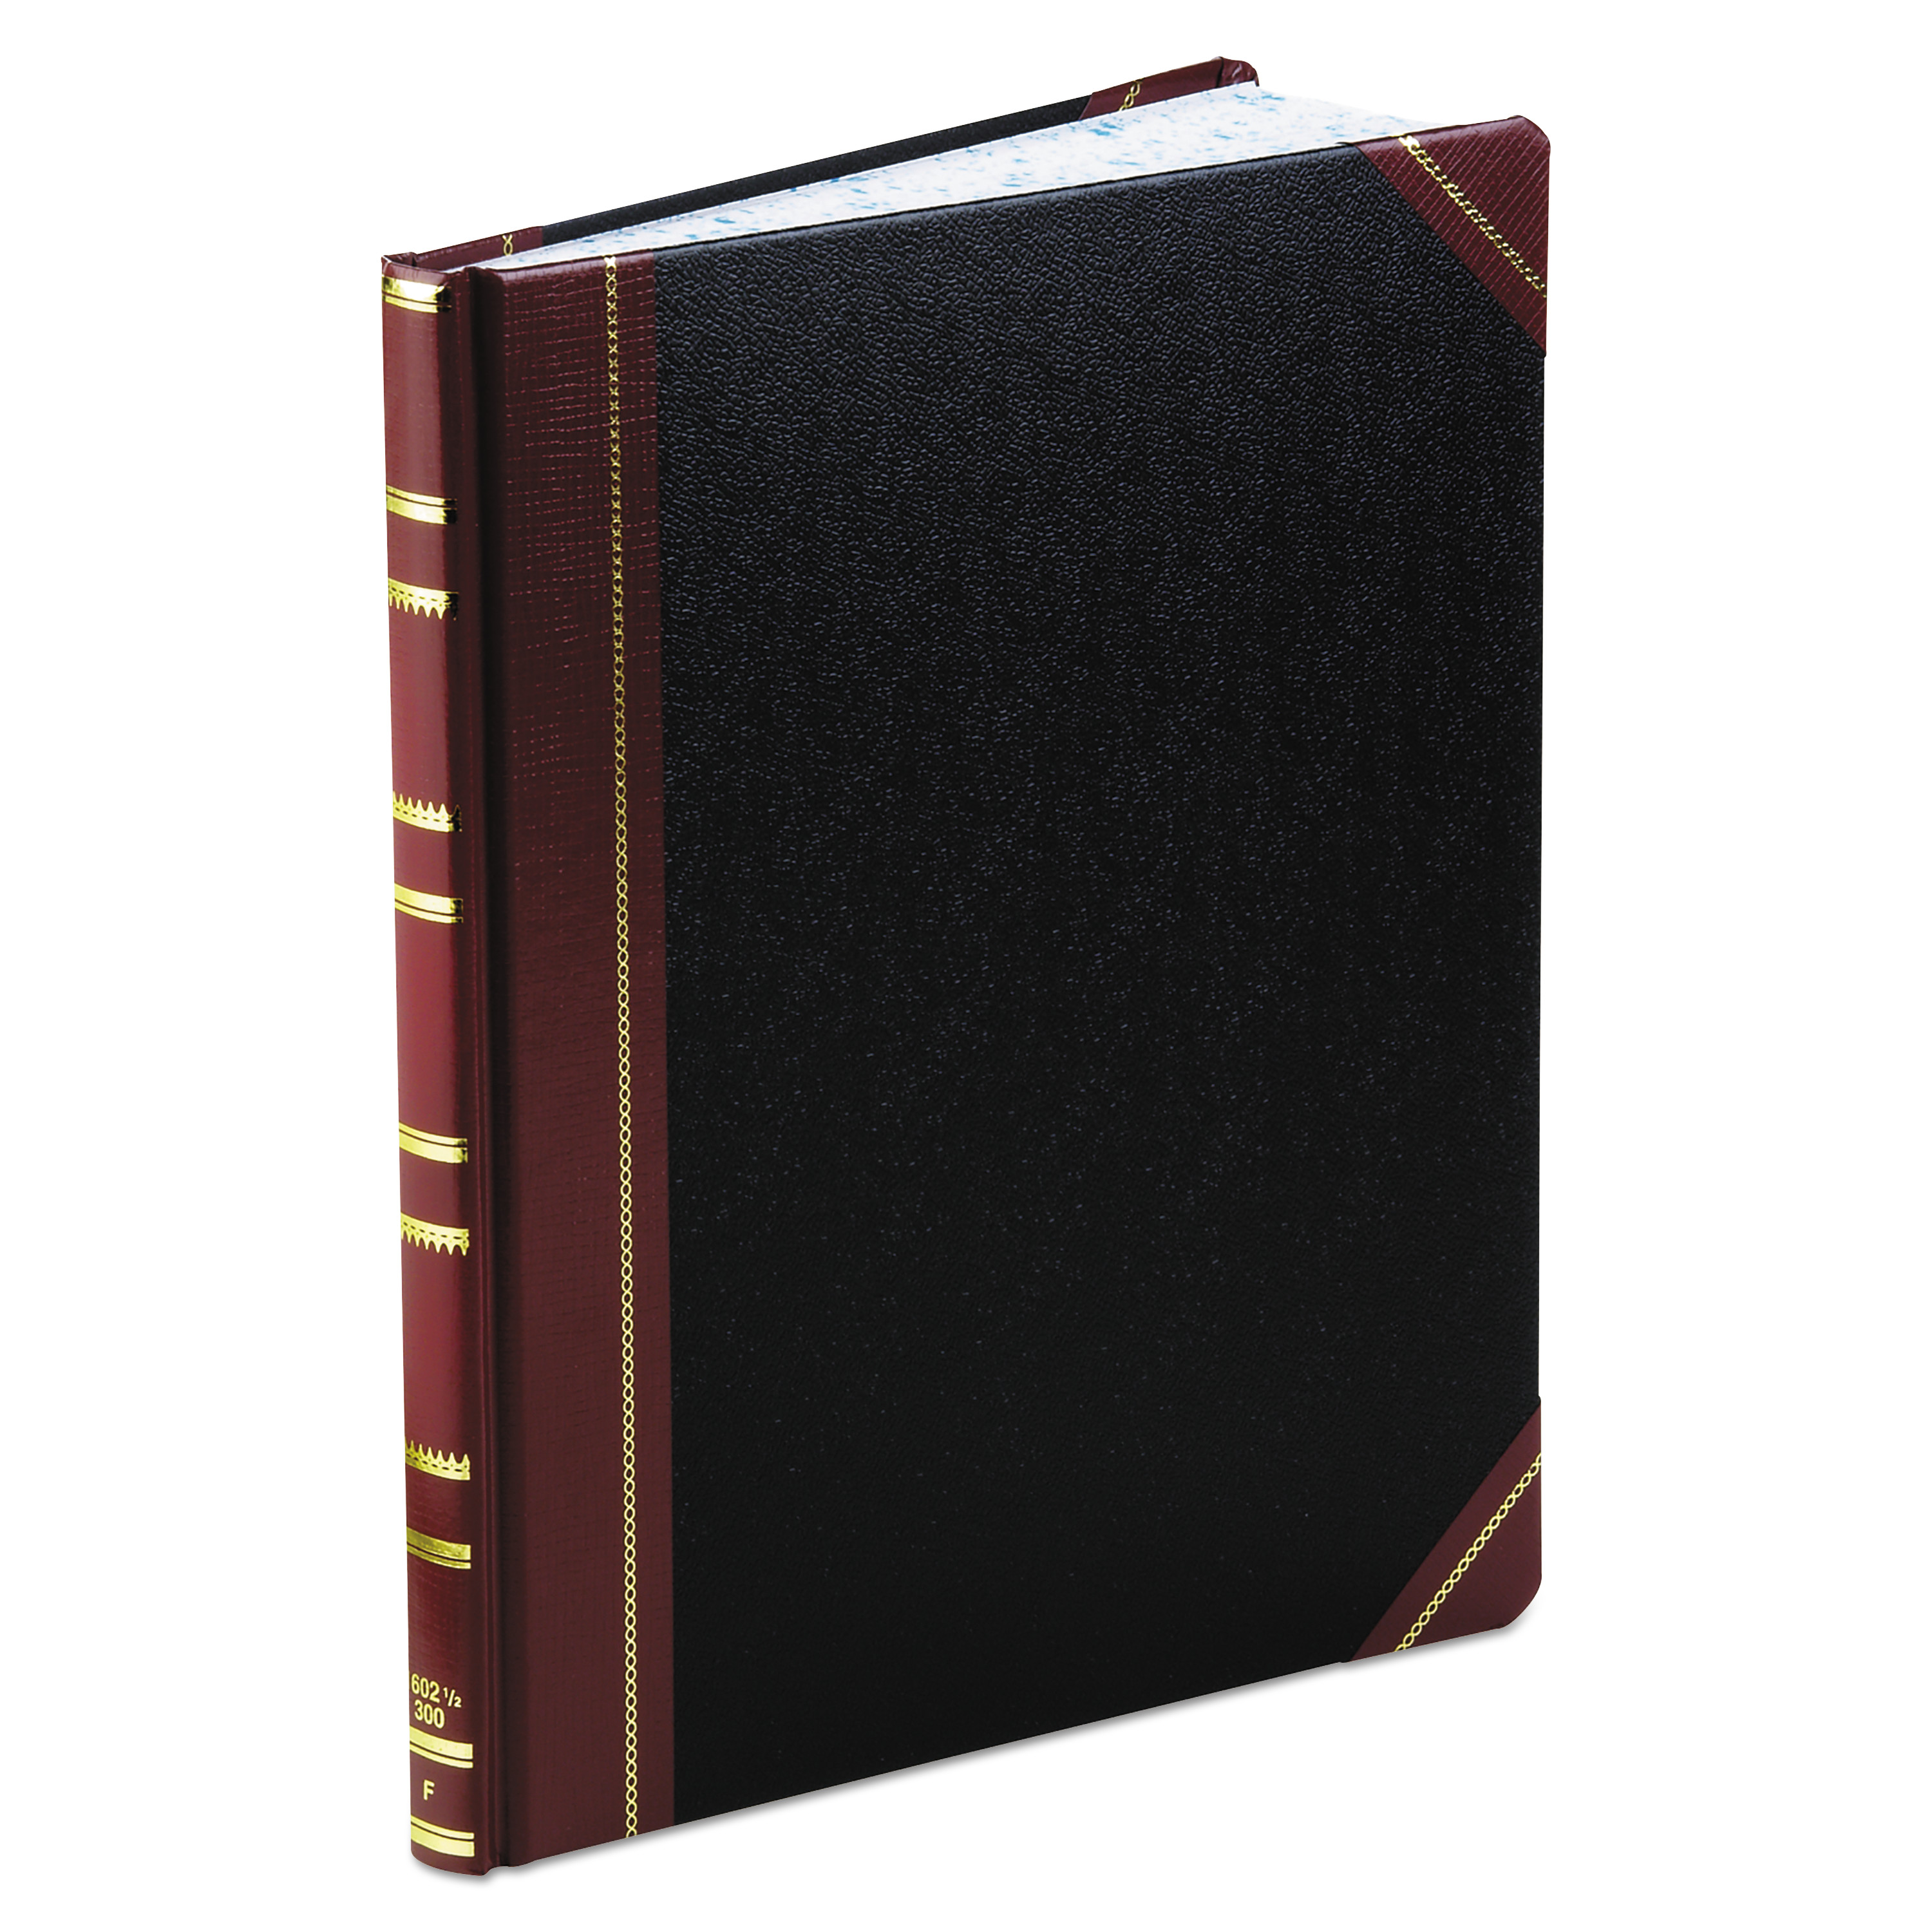  Boorum & Pease 1602 1/2-300-F Record Ruled Book, Black Cover, 300 Pages, 10 1/8 x 12 1/4 (BOR1602123F) 